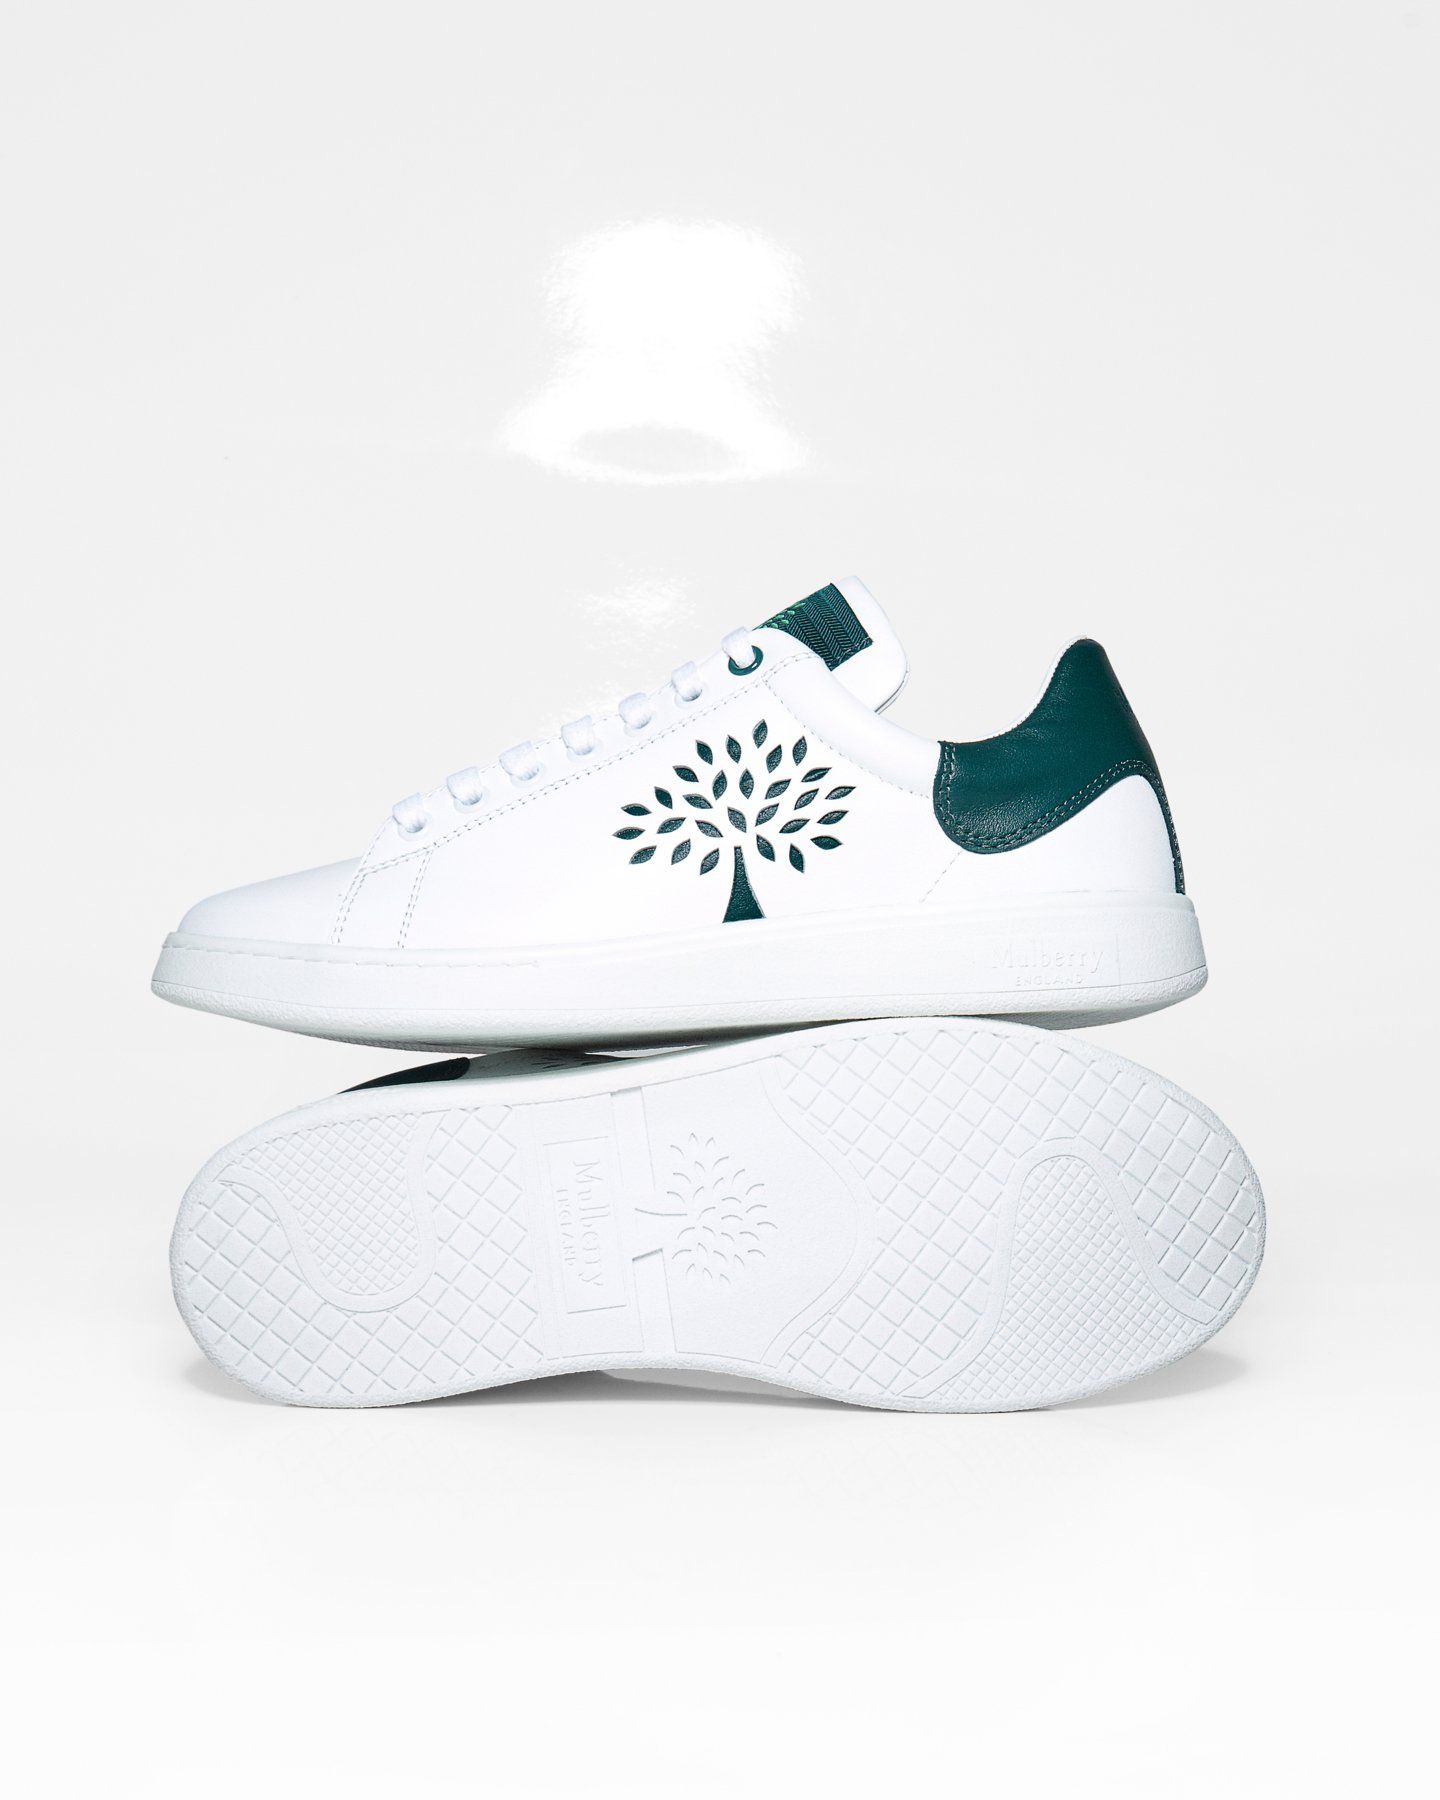 Mulberry Tree Tennis Trainers in Mulberry Green